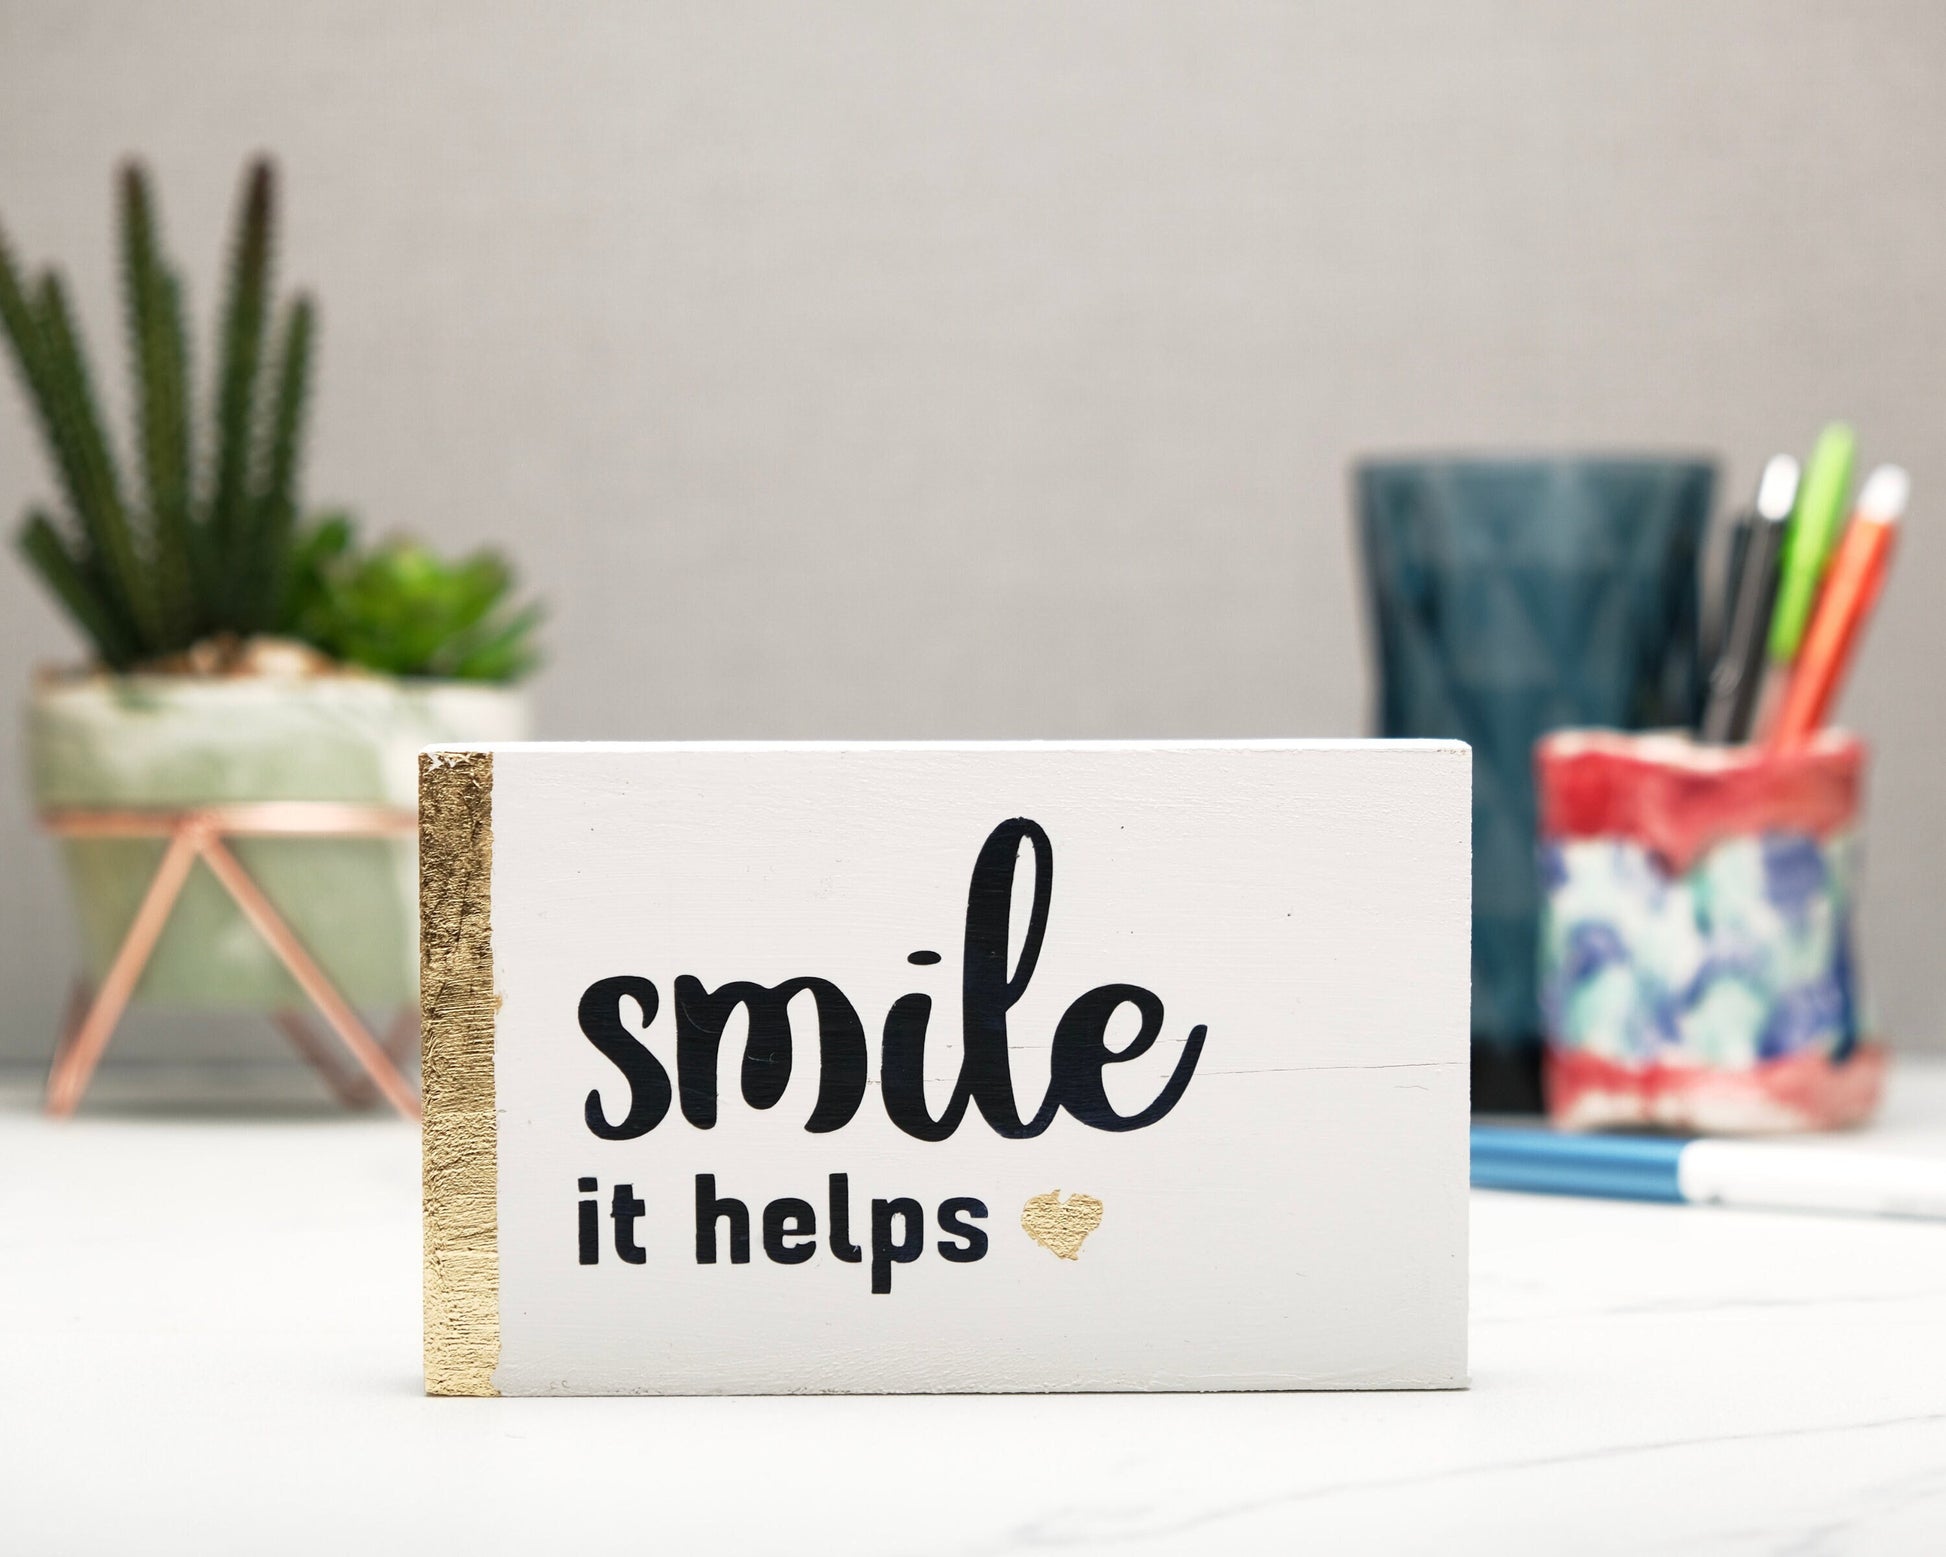 Small freestanding rectangular wooden sign facing straight on. White wood stain, gold vertical border on left side. Black painted quote, Smile it helps. Small solid bronze rose gold heart. Plant and pen pot out of focus in background.